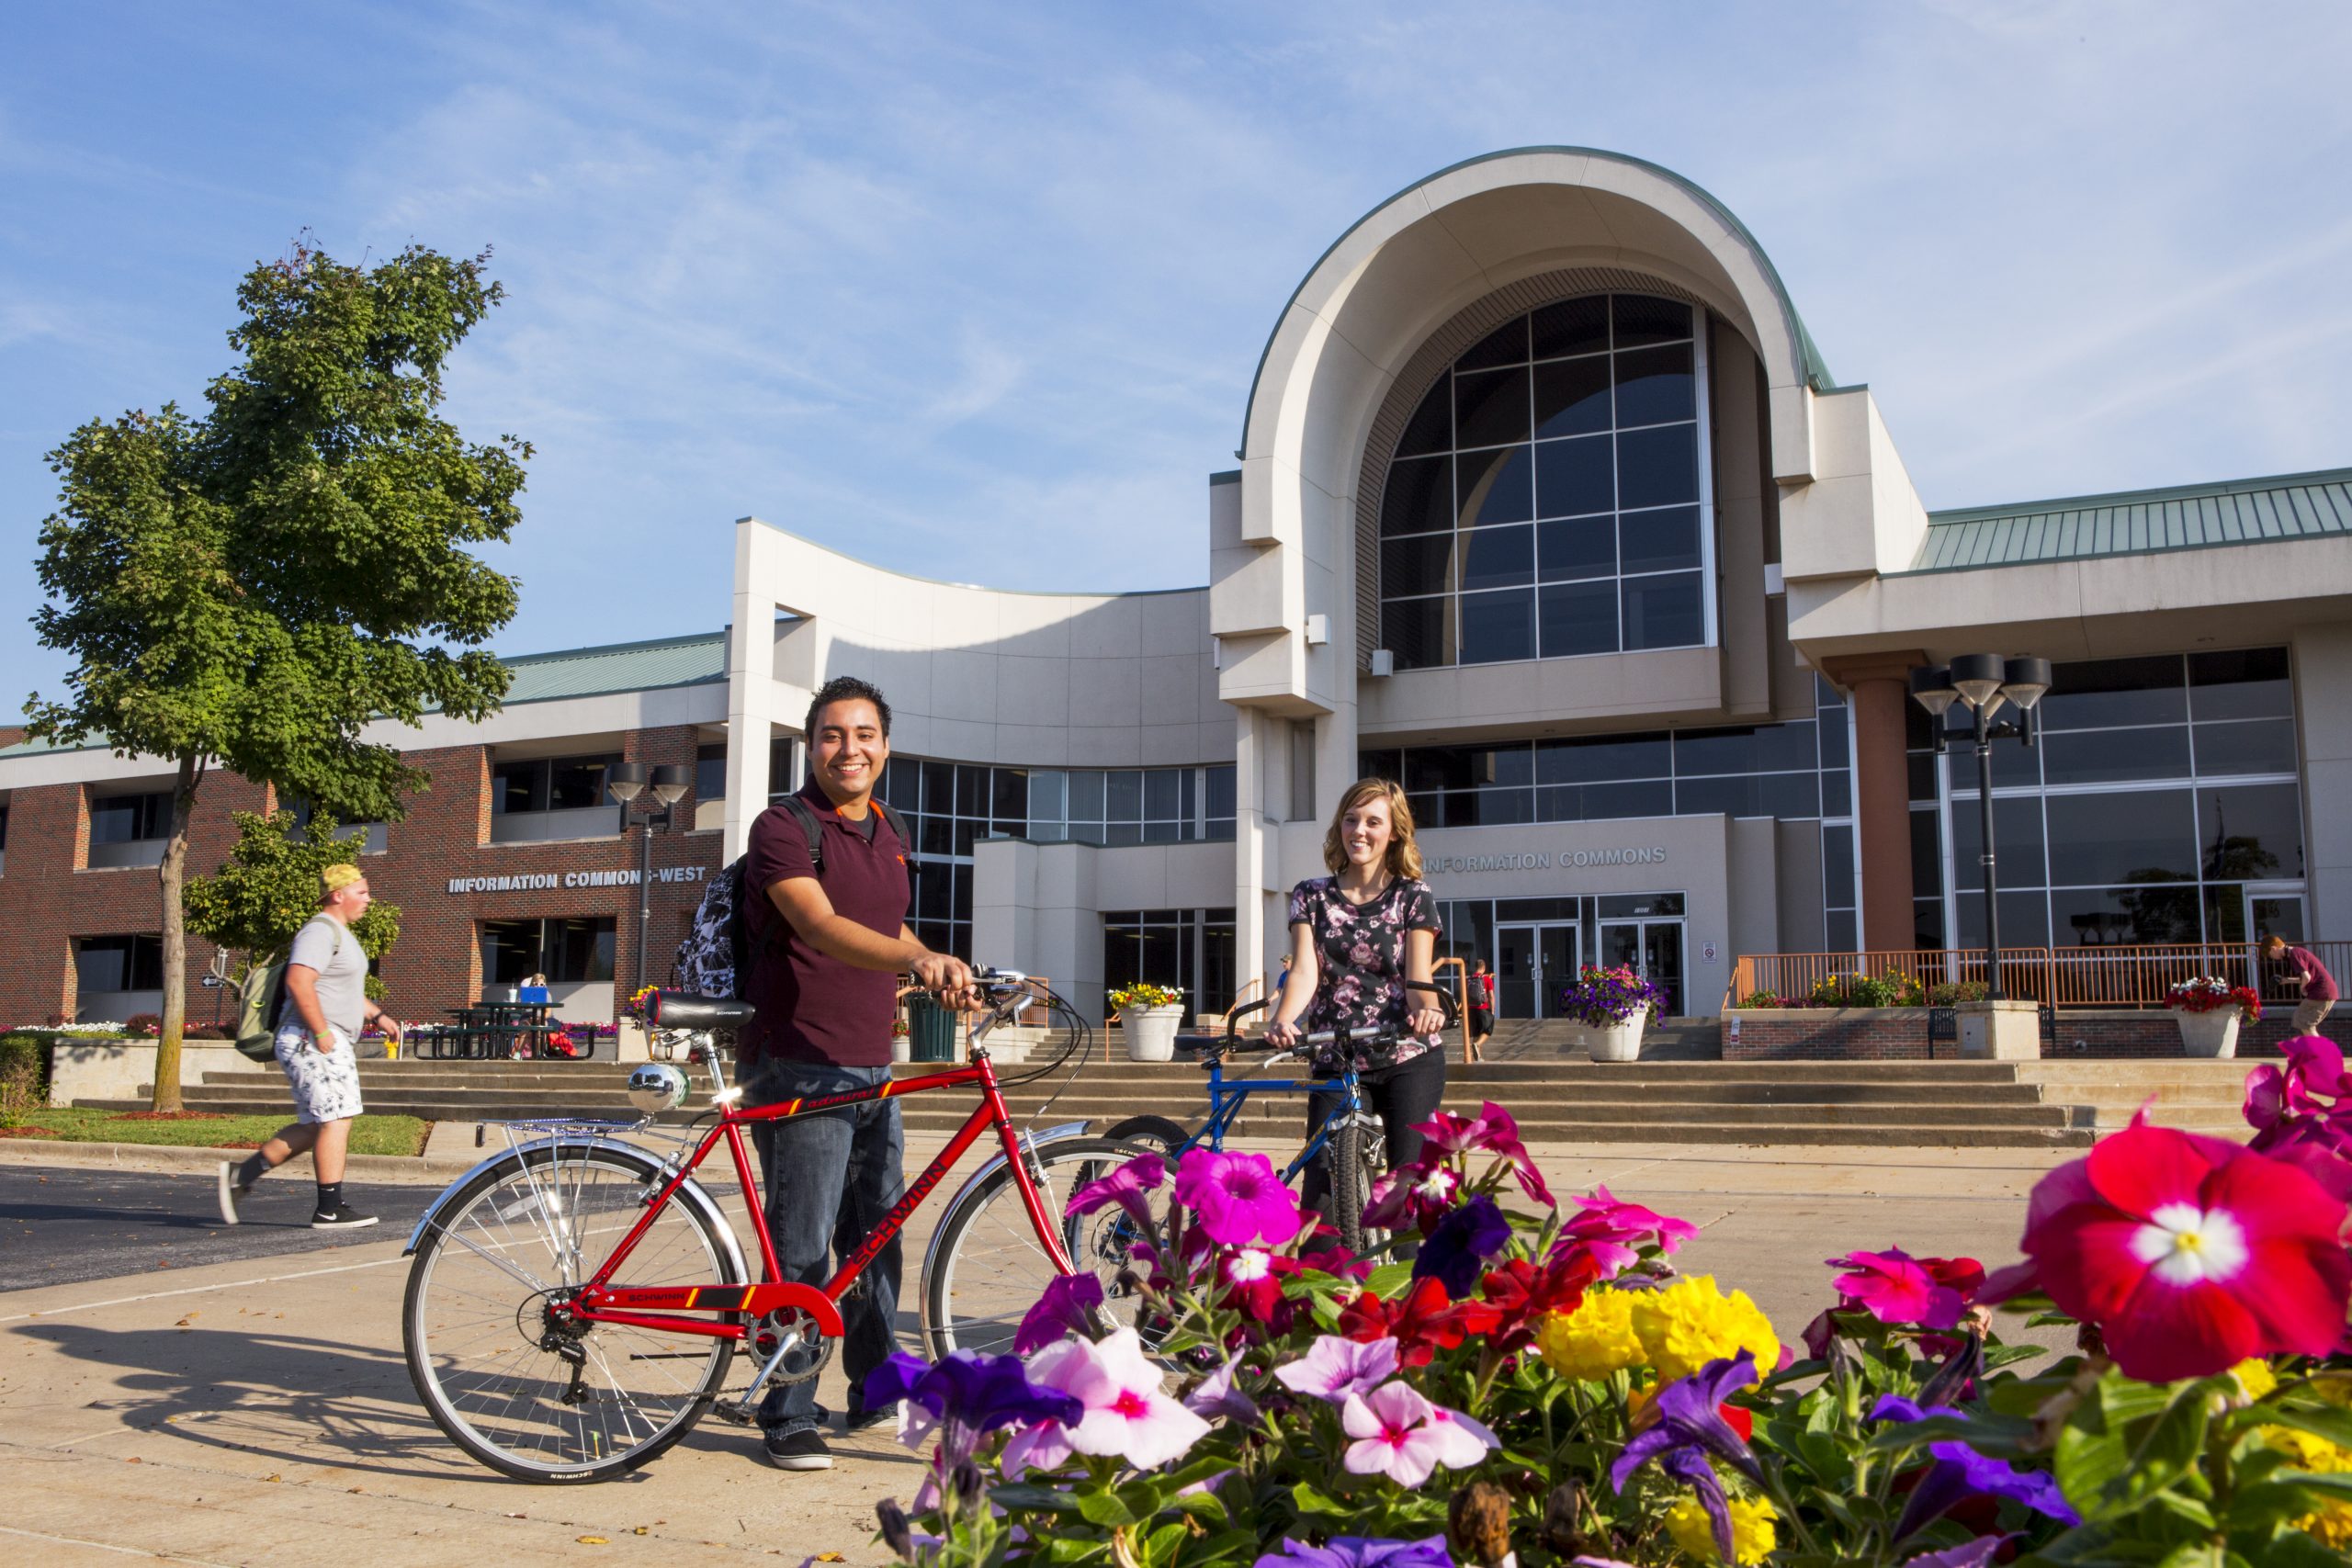 OTC Information Commons Students with Bikes